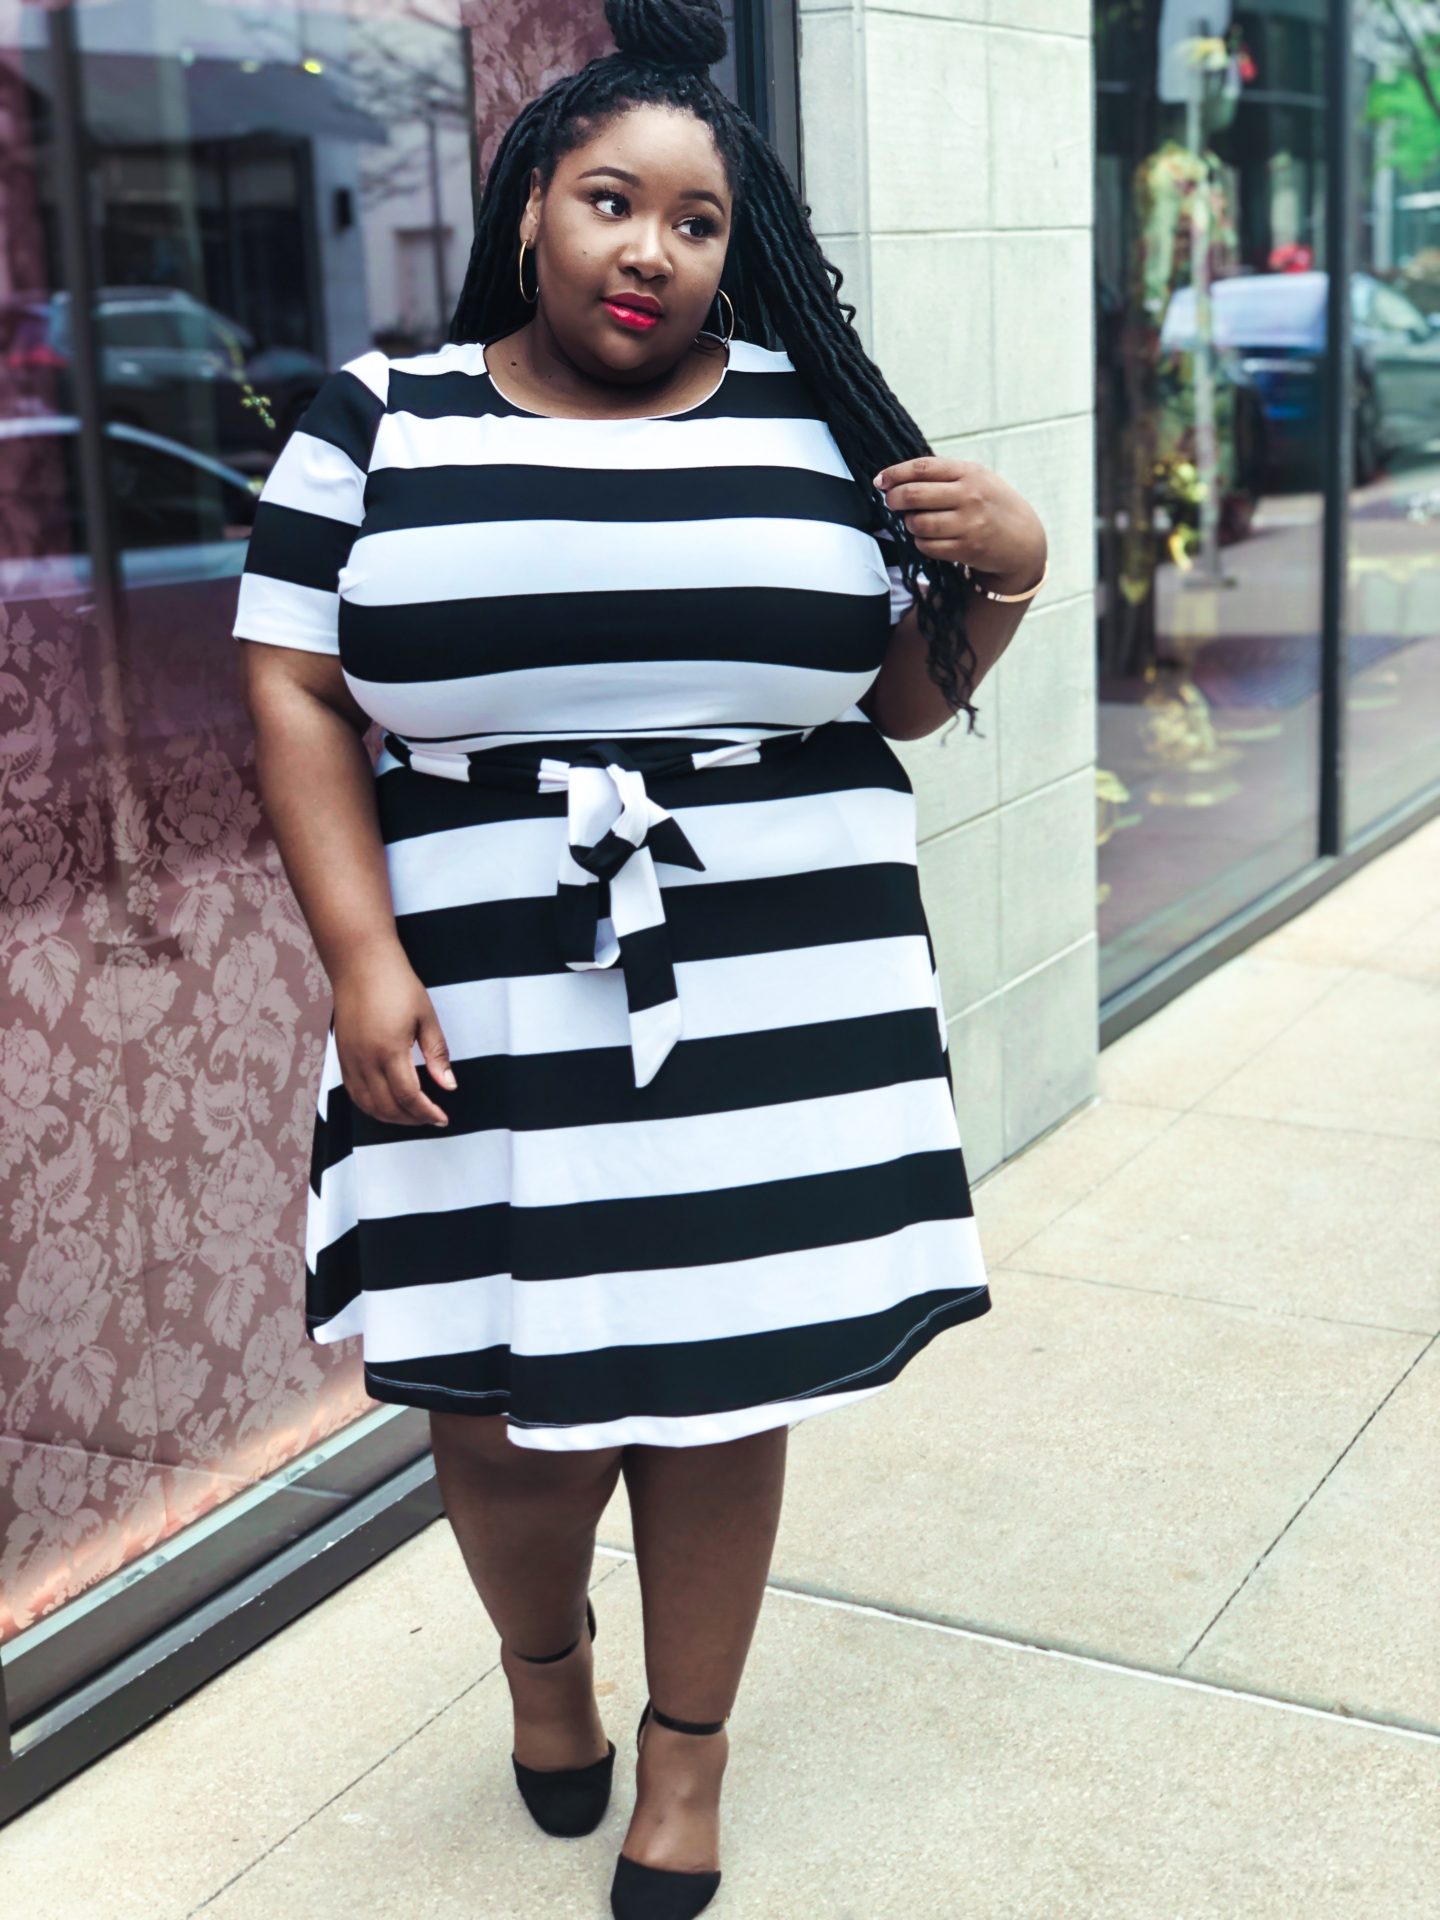 Plus Size Fashion  Beauticurve X Lane Bryant Collection - From Head To  Curve %